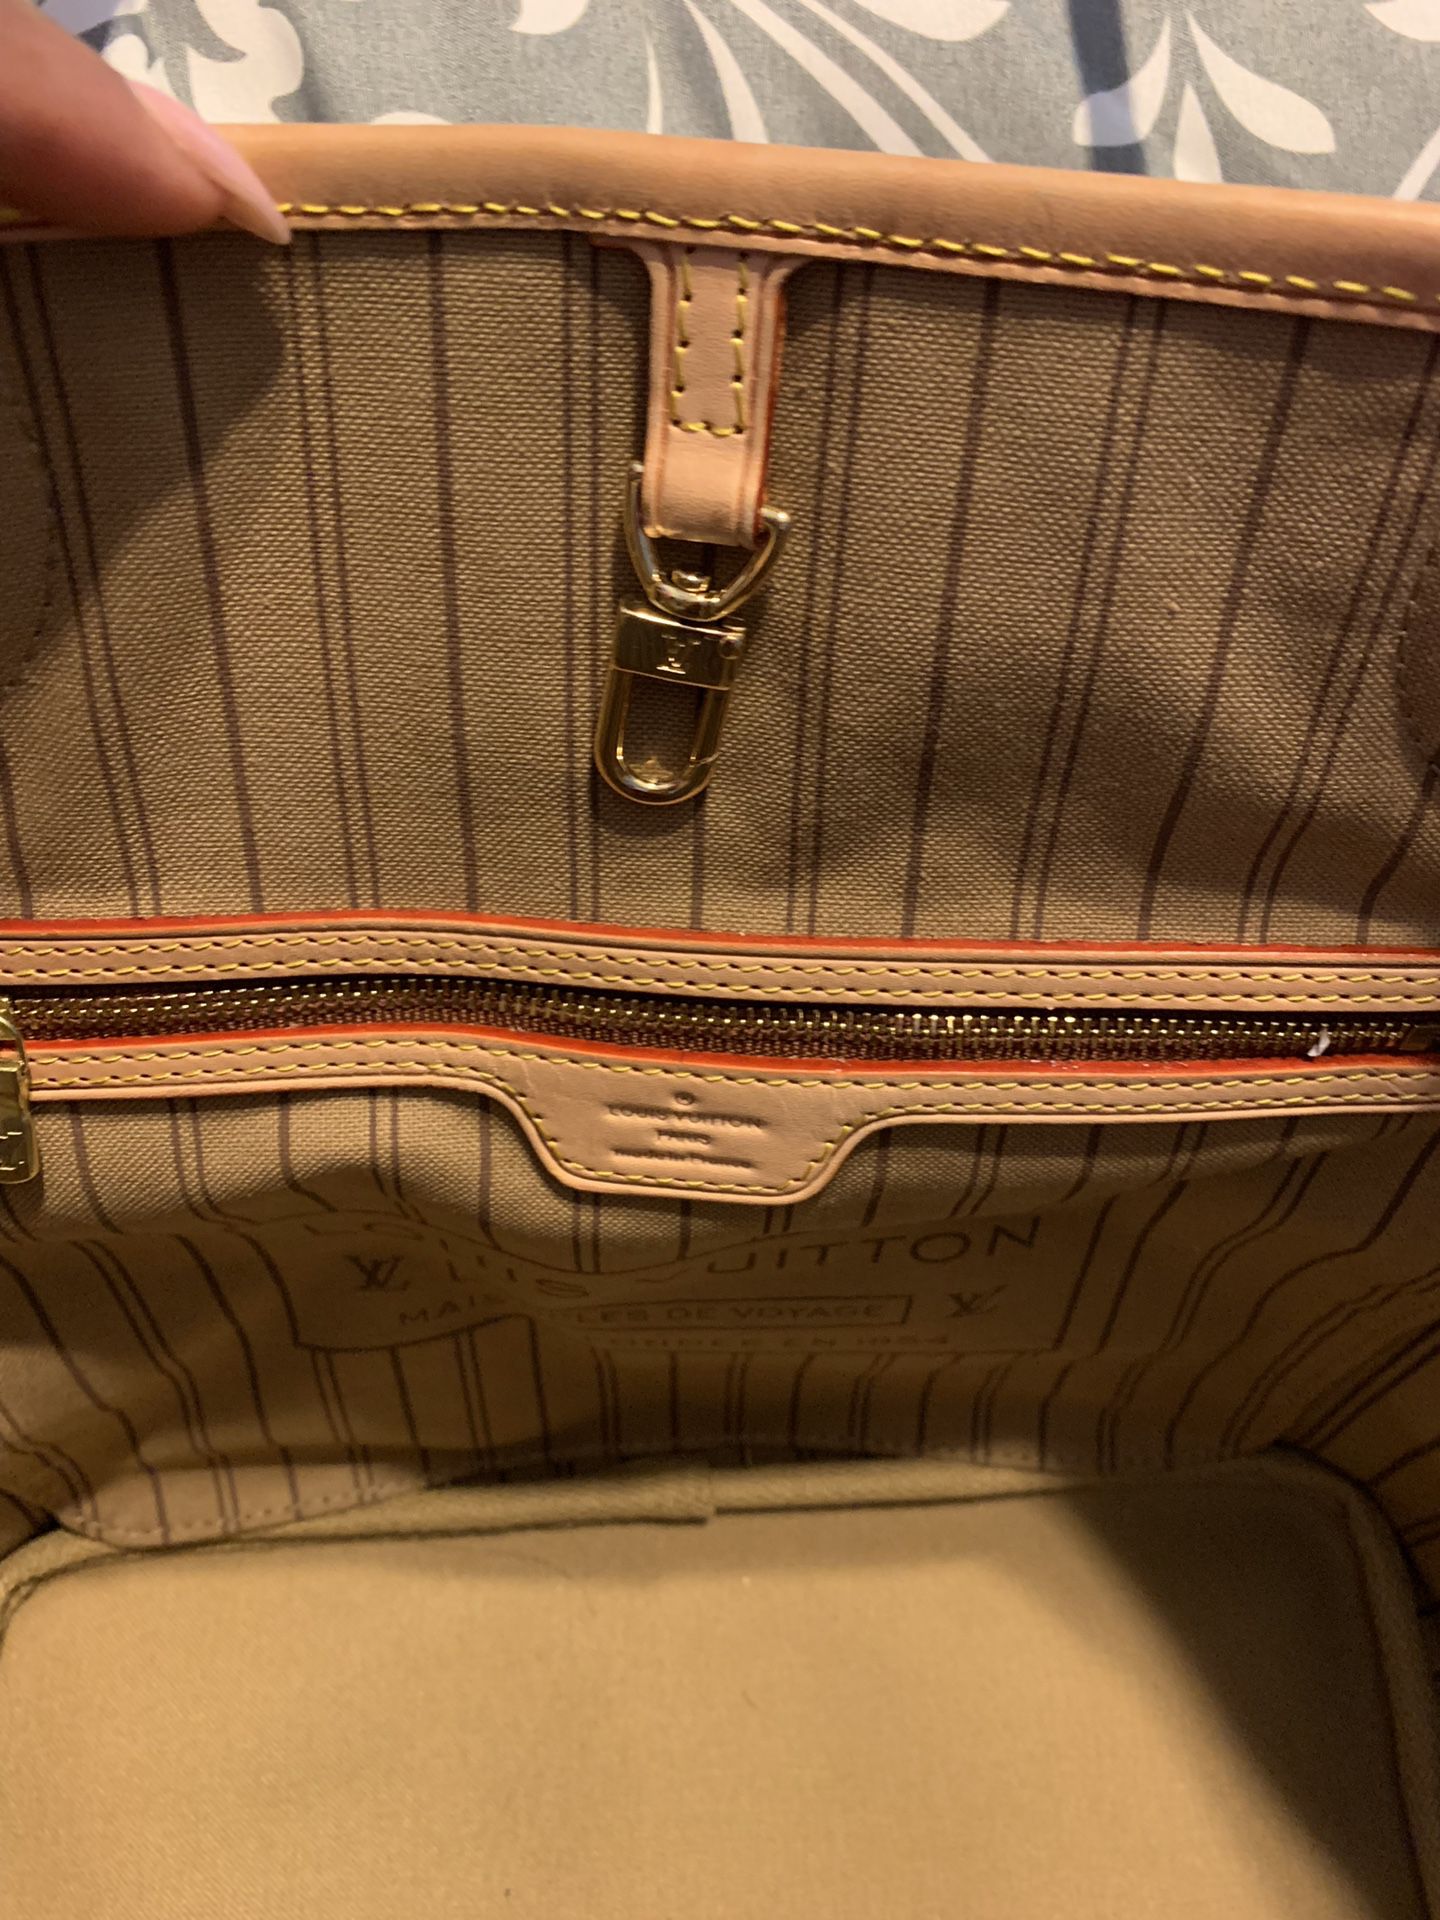 Lv Neverfull MM with Dust Bag for Sale in Lake Charles, LA - OfferUp